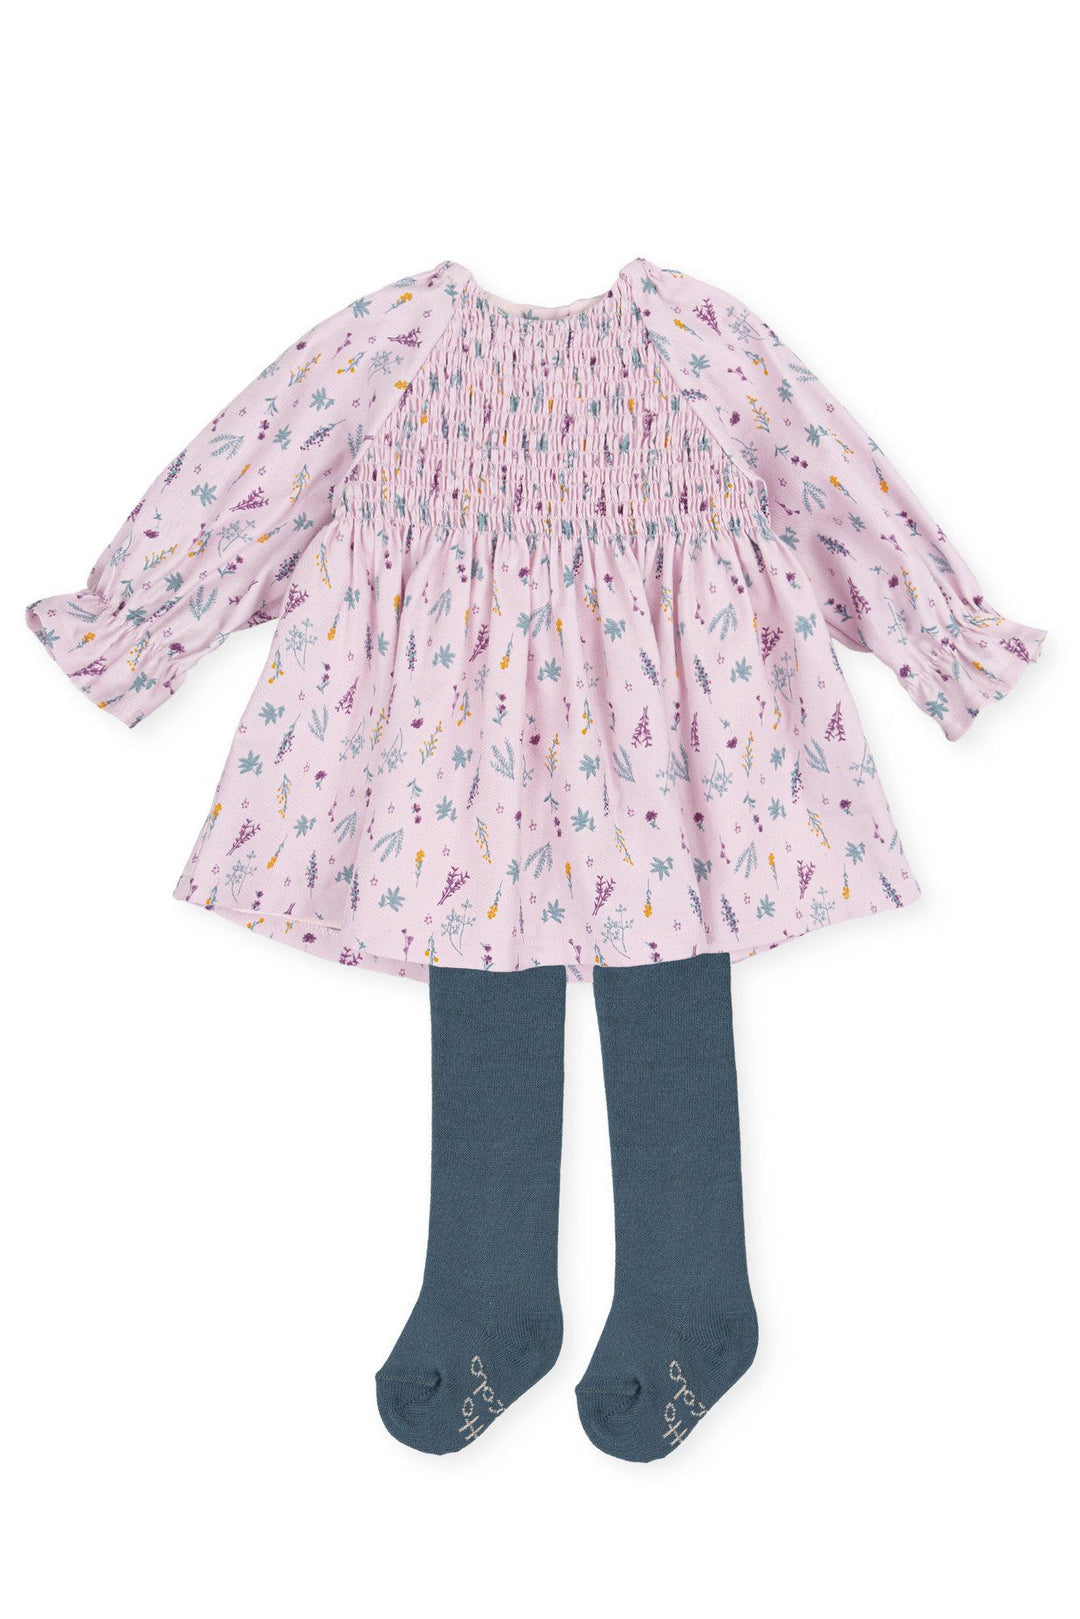 Tutto Piccolo "Nancy" Lilac Floral Dress & Tights | Millie and John